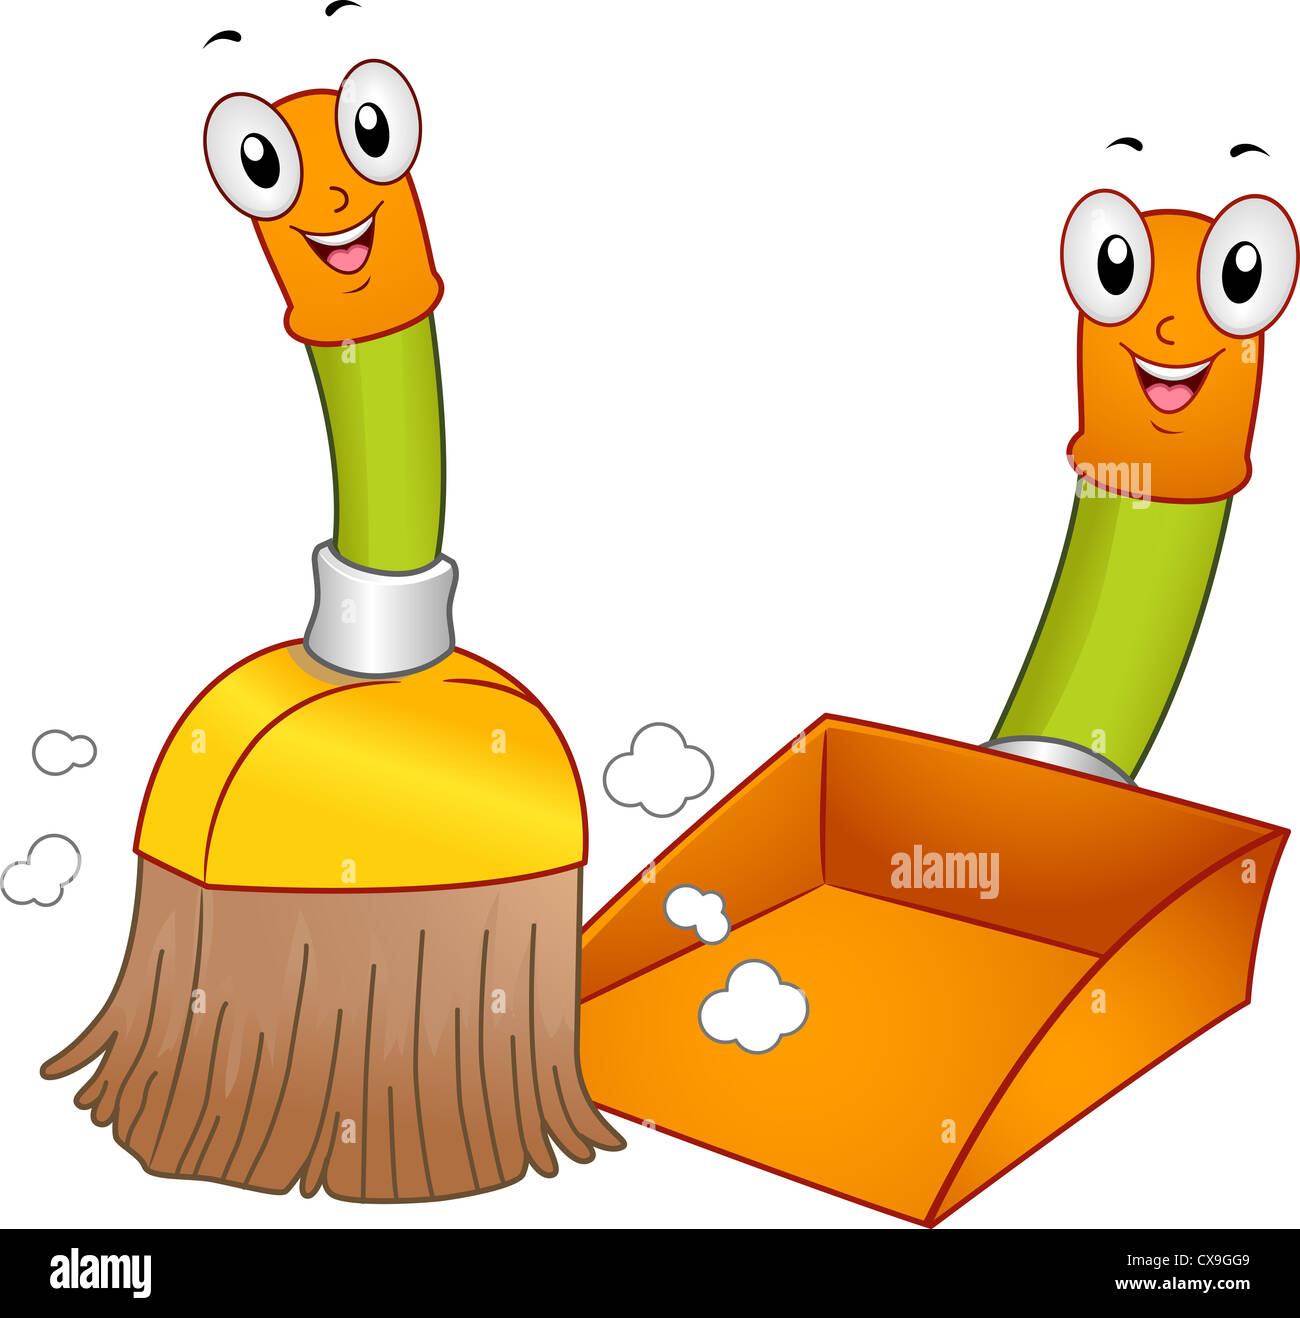 Mascot Illustration of a Broom and a Dustpan Cleaning the Floor Stock Photo  - Alamy